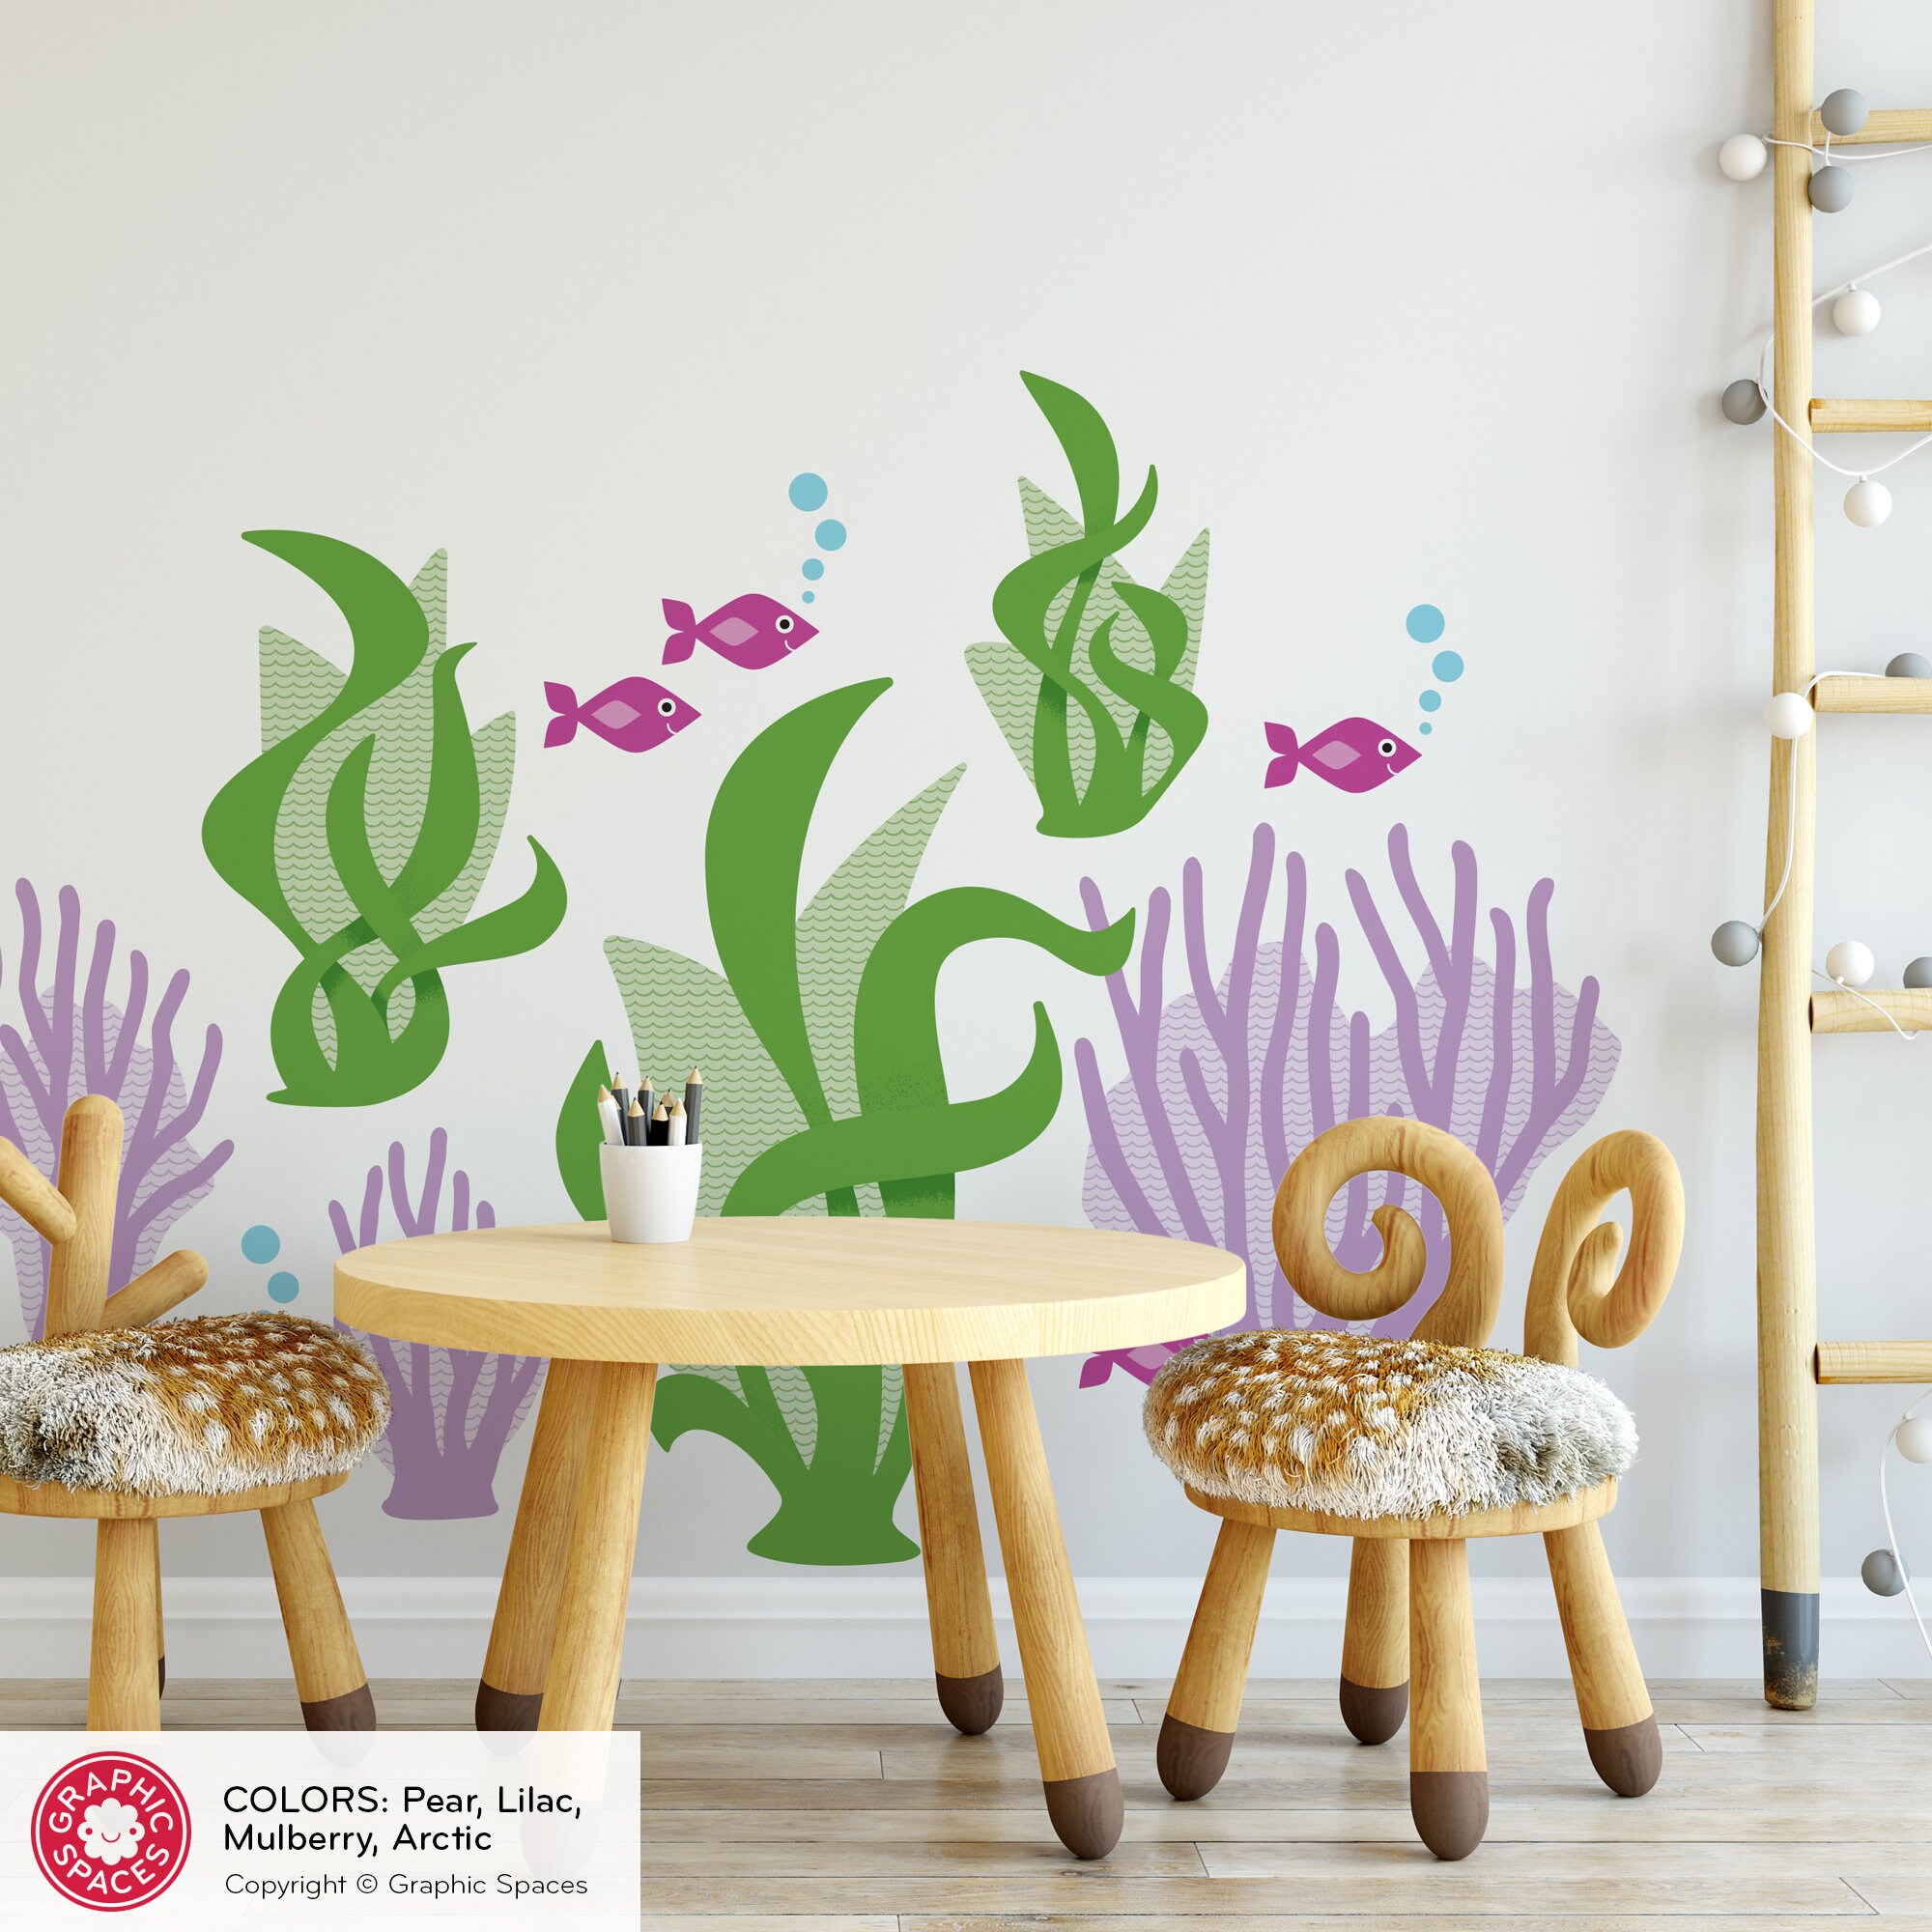 Underwater Ocean Wall Stickers - 3D Removable Decal for Home – Decords